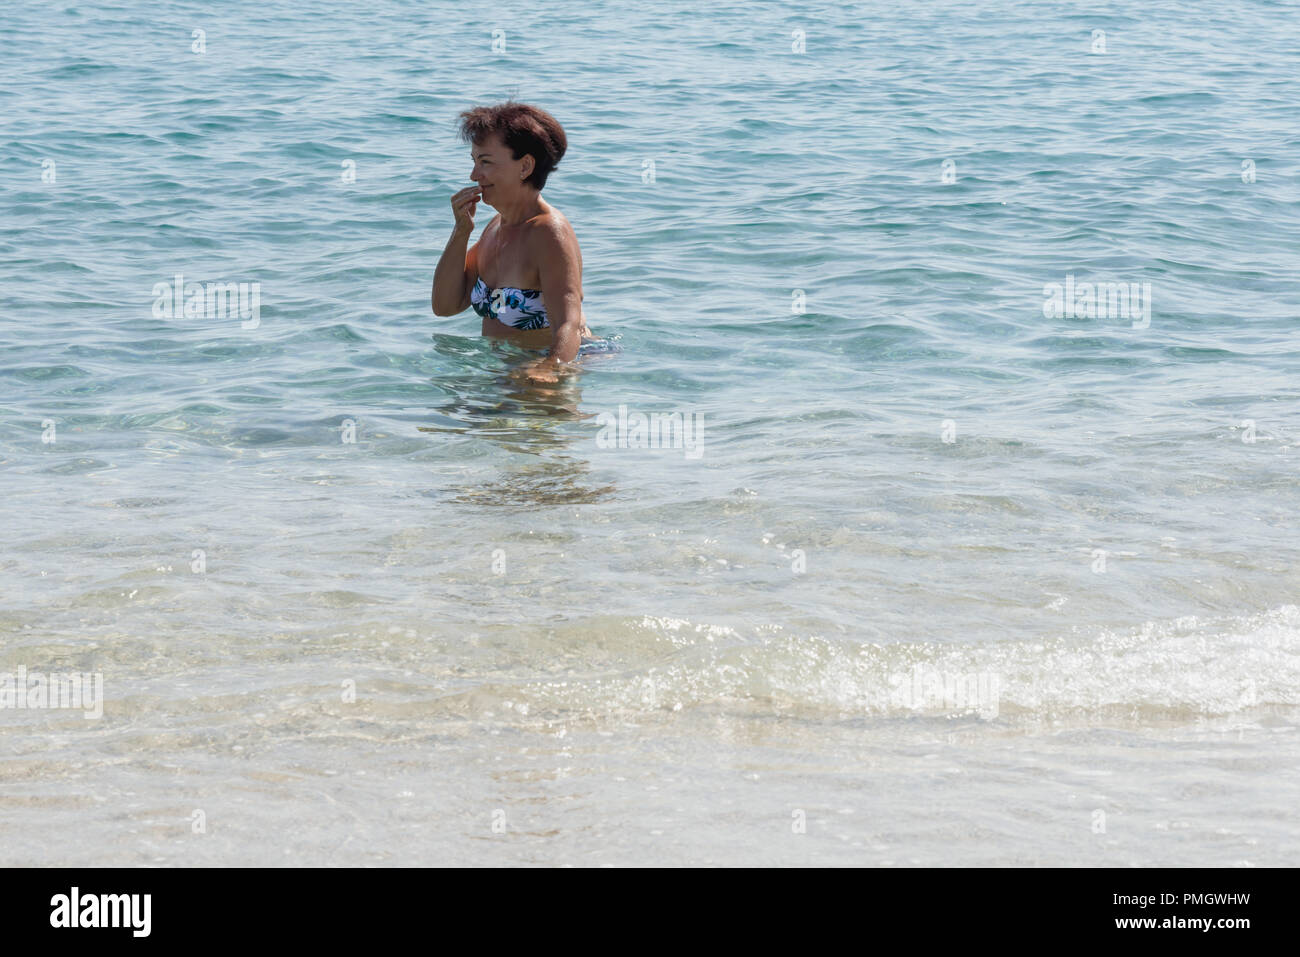 Italy Calabria Middle-aged woman at the sea in the water Stock Photo